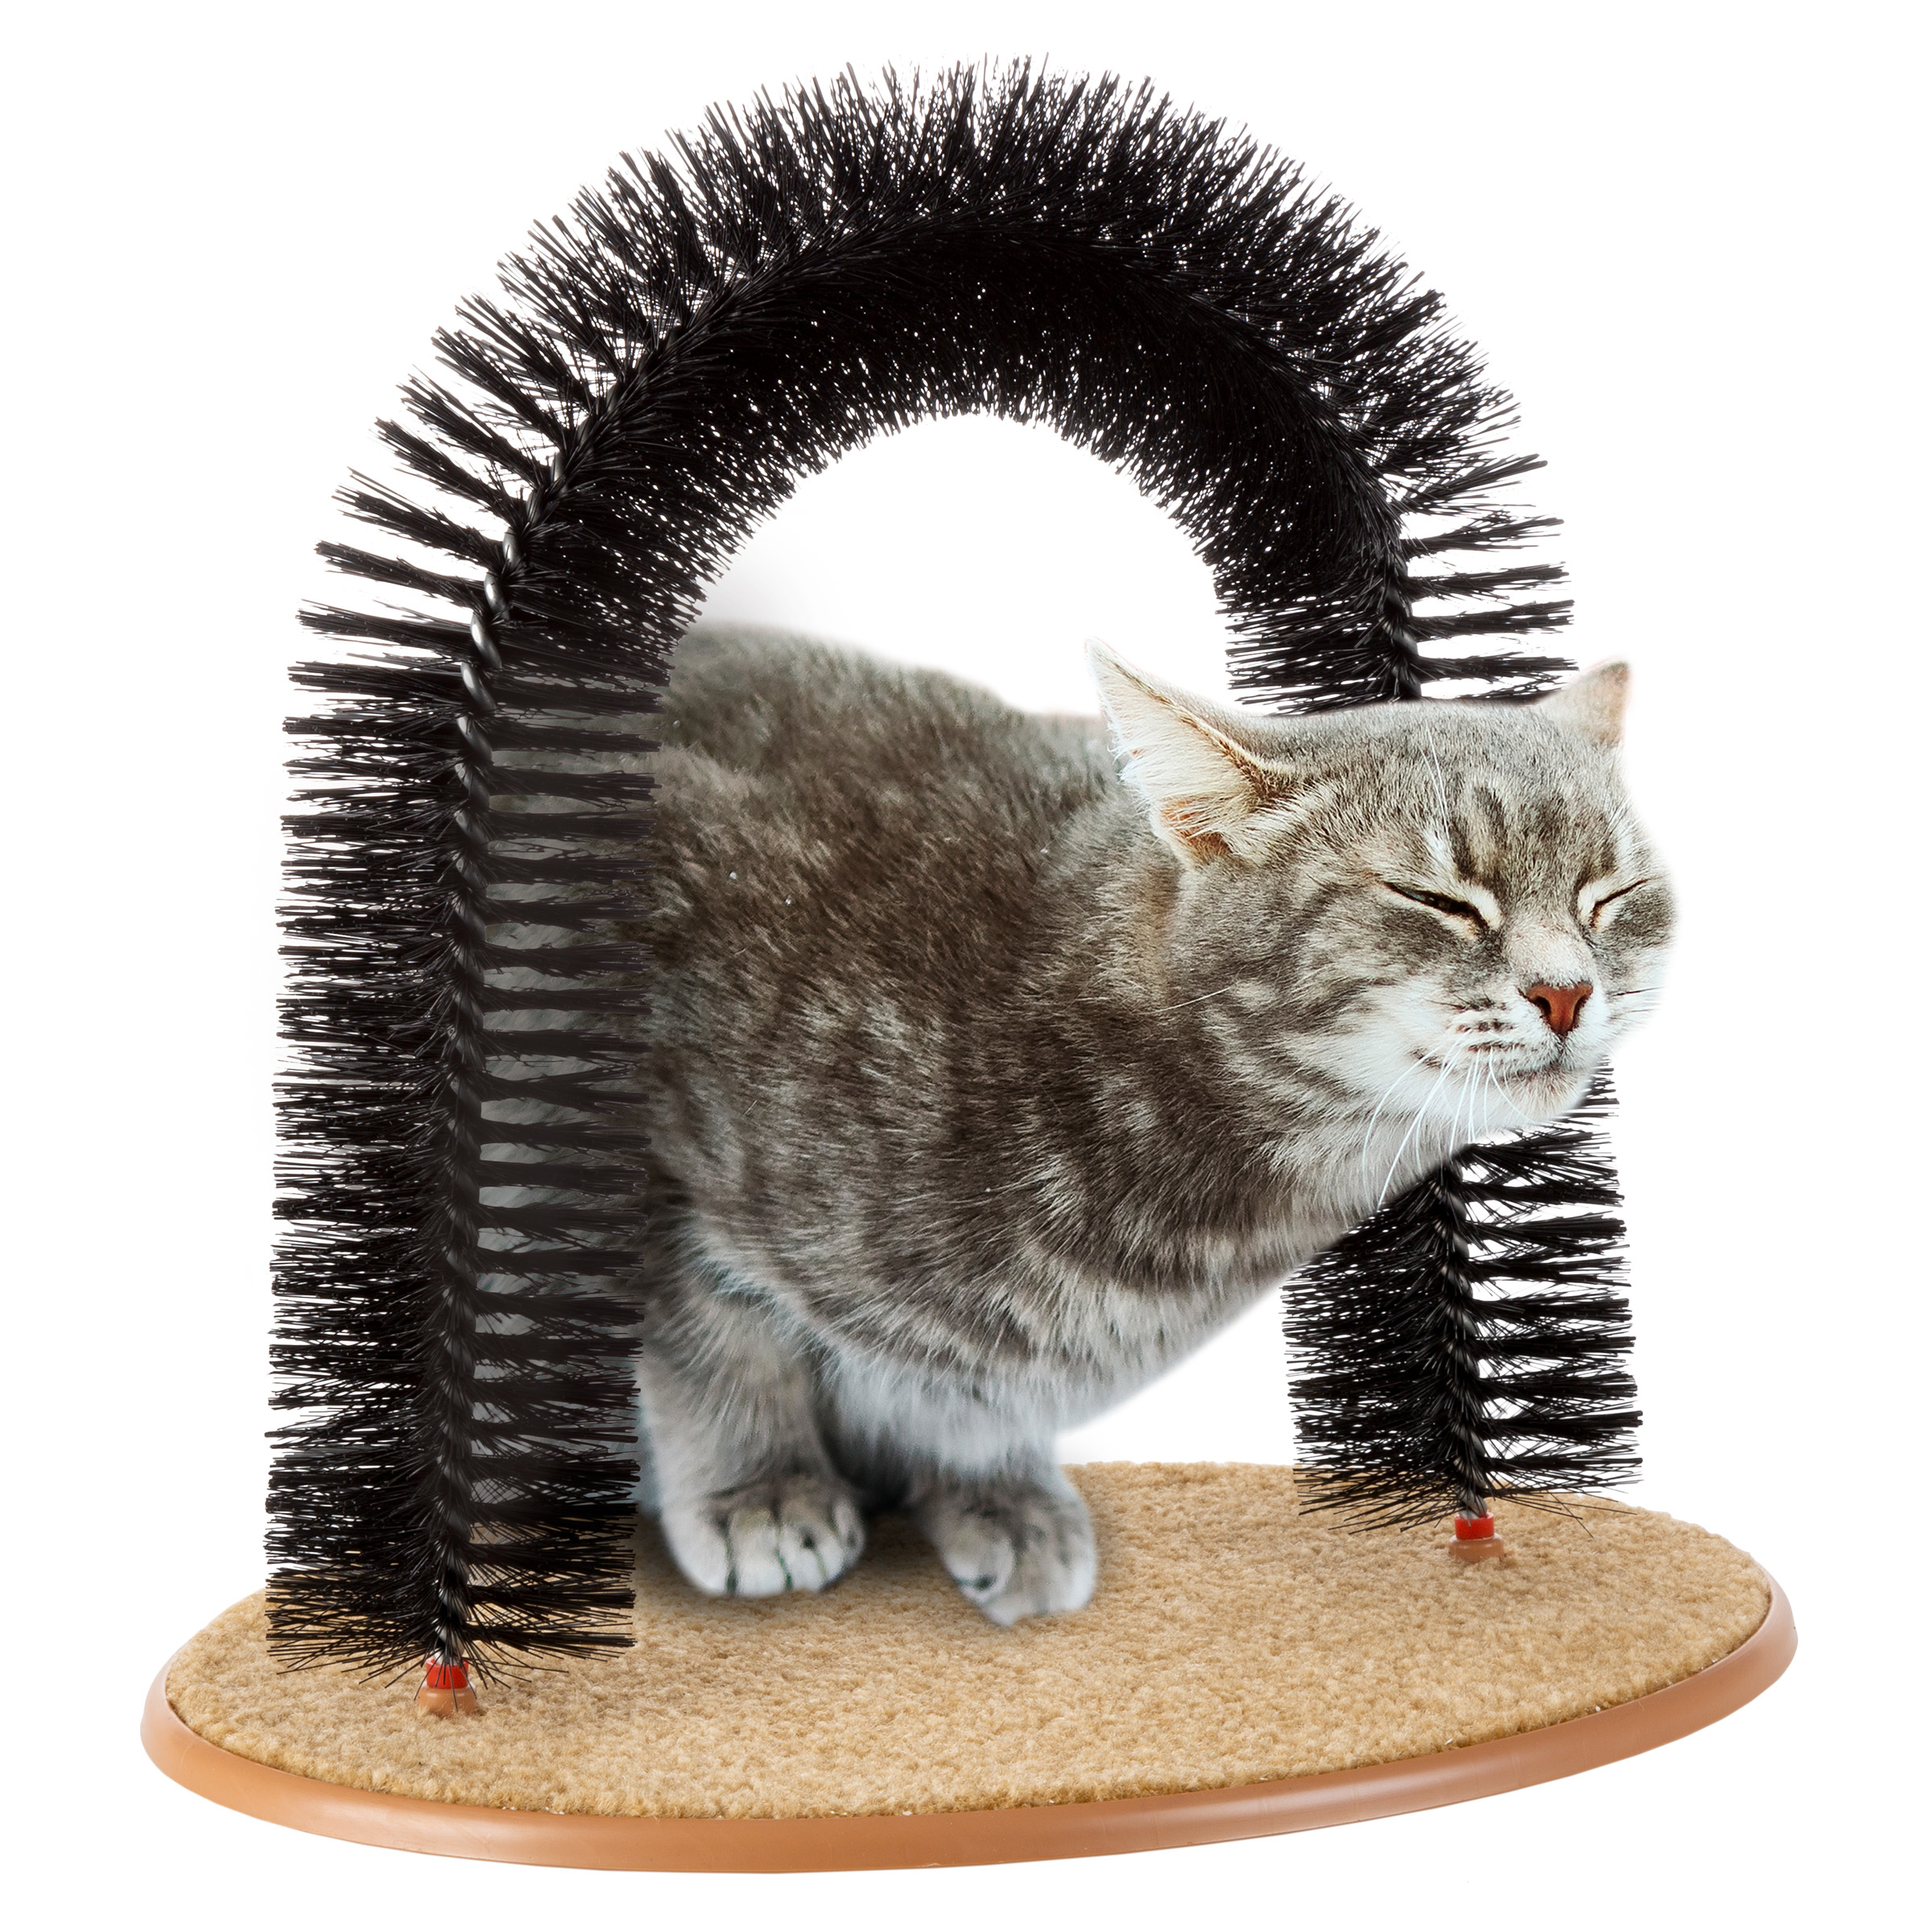 Self Grooming Cat Arch- Bristle Ring Brush And Carpet Base Groomer, Massager, Scratcher For Controlling Shedding, Healthy Fur And Claws